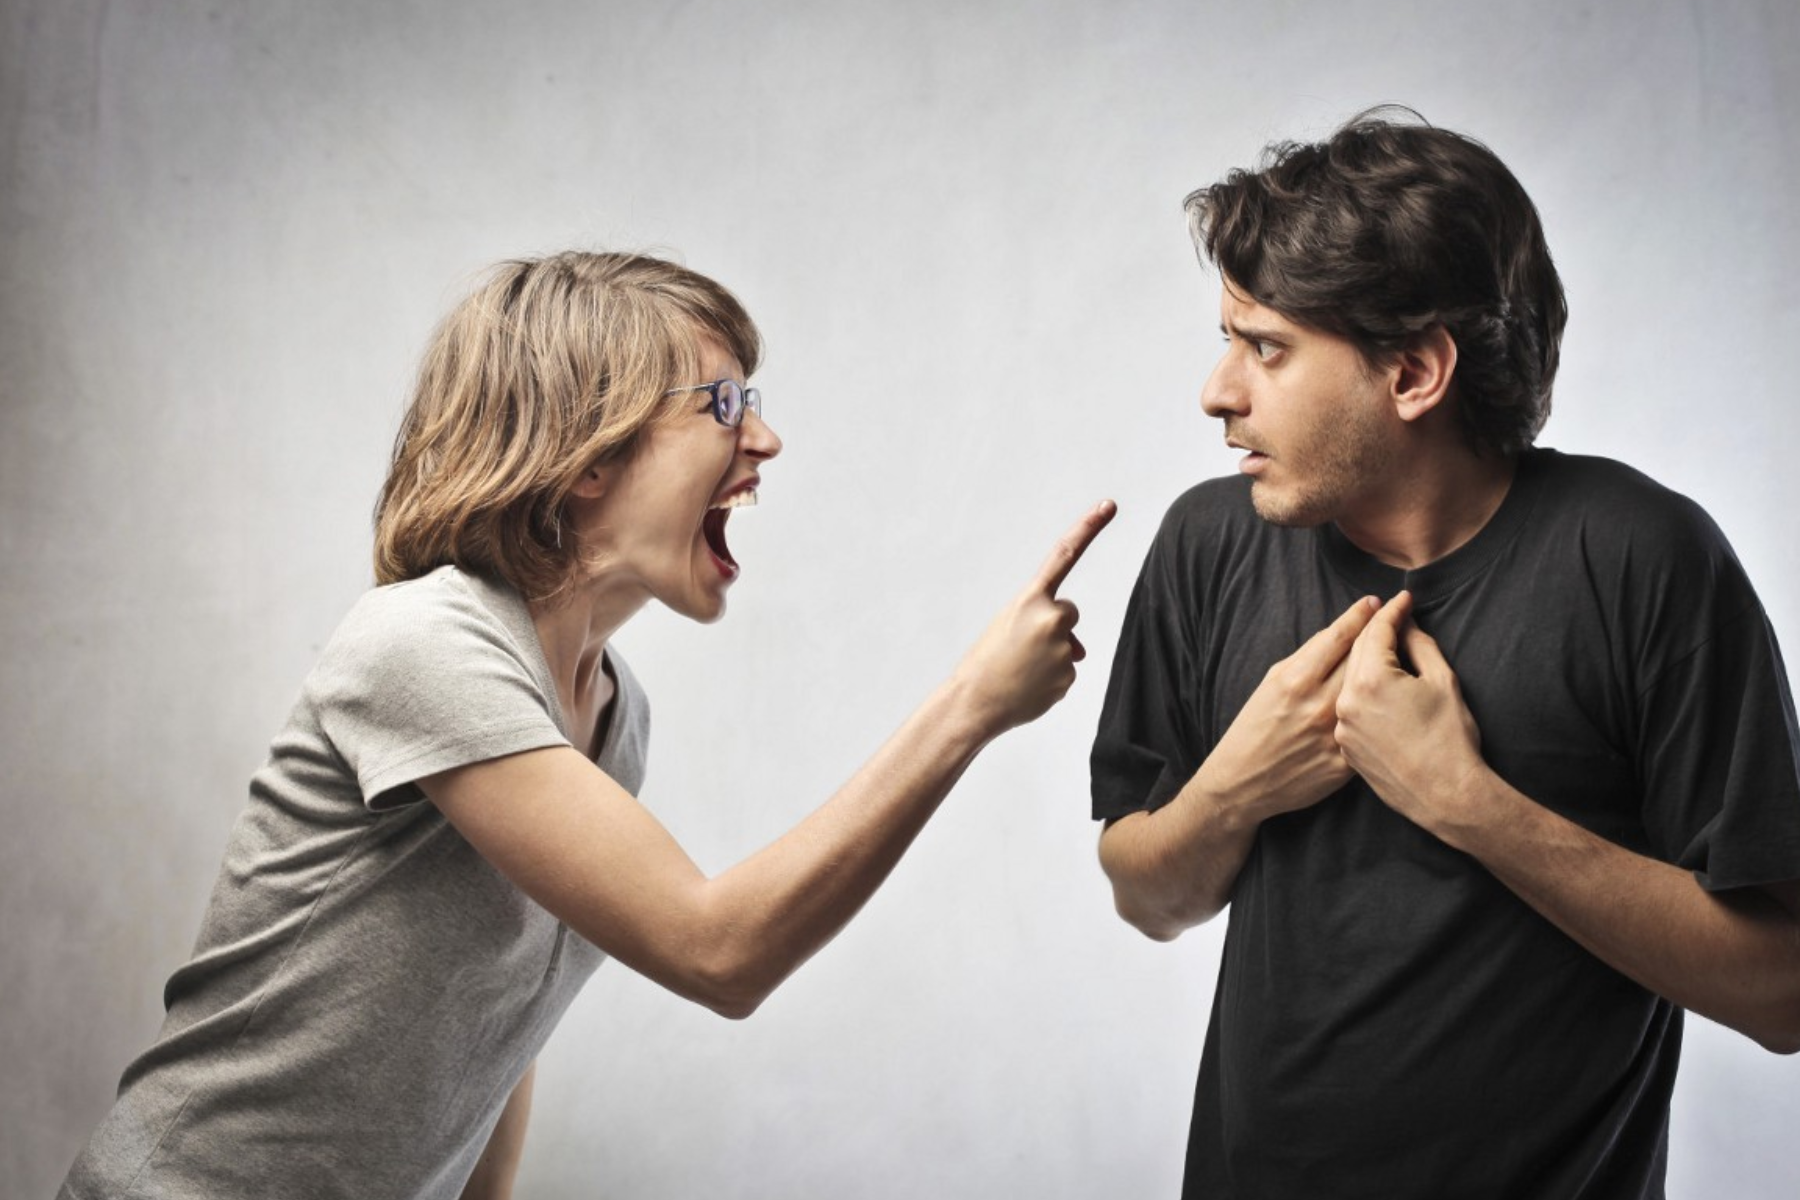 A woman shouting at and pointing fingers at a man